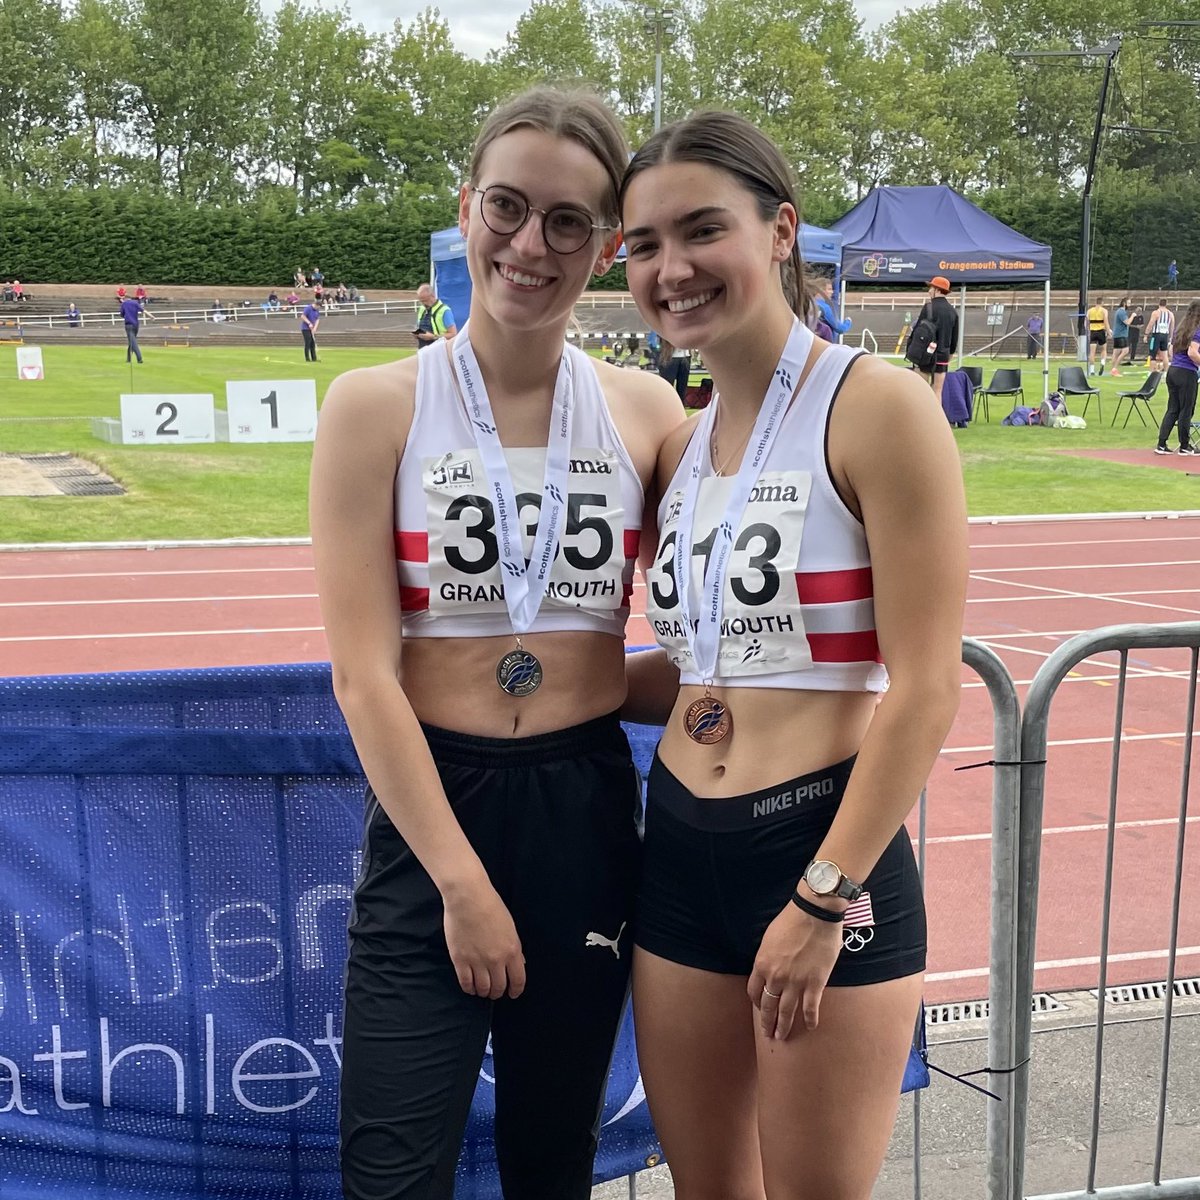 These 2 ❤️❤️ Silver and bronze @scotathletics National Champs 100mH. @AberdeenAAC @aberdeenuni flatmates! Great pals and rivals since 12 years old. #Athleticsfamily ❤️🏴󠁧󠁢󠁳󠁣󠁴󠁿